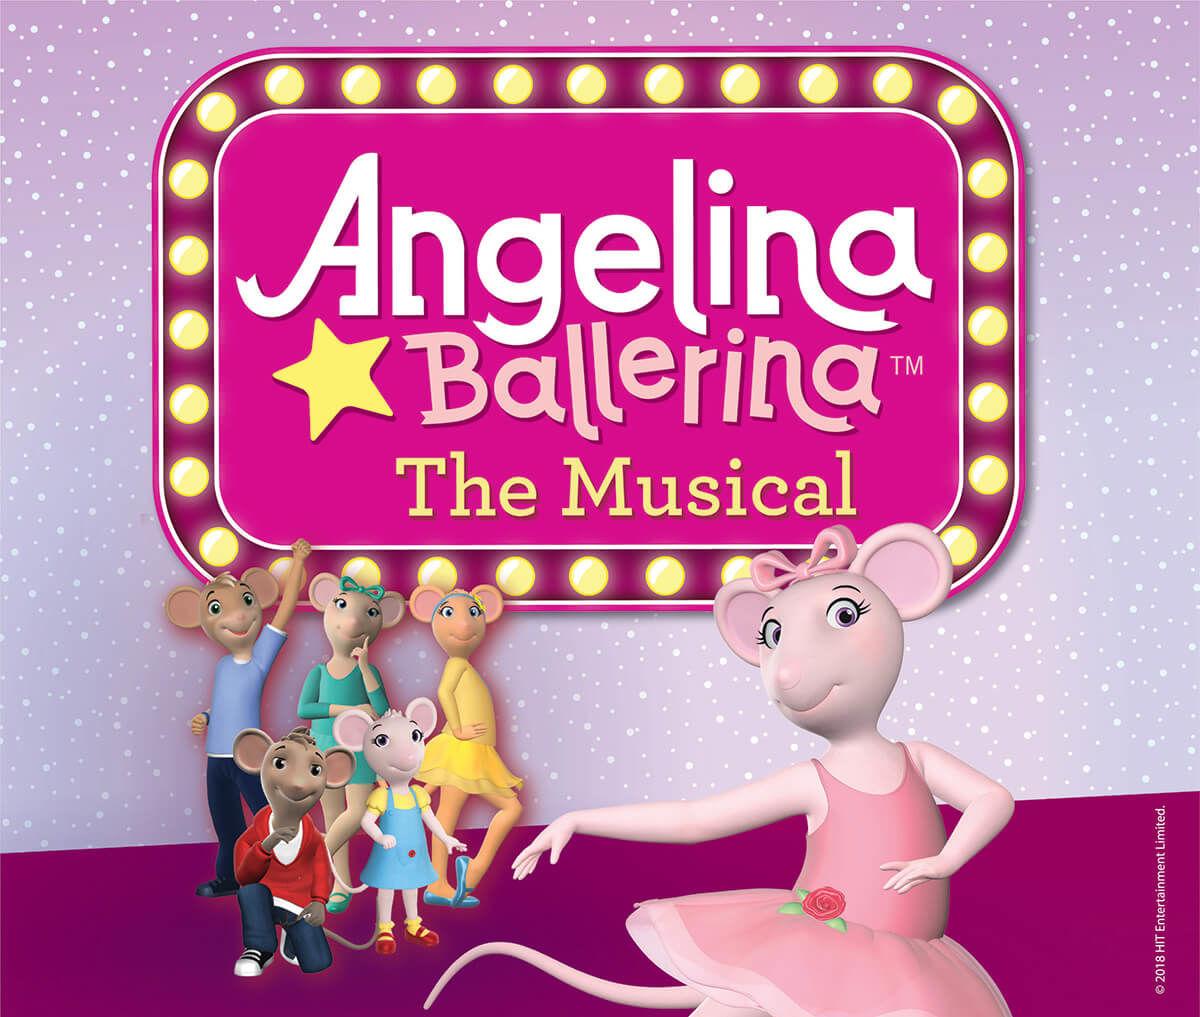 Terminologi vinge Vedholdende Vital Theatre Company and Hit Entertainment present Beloved Children's  Stage Production of Angelina Ballerina™ The Musical | Music | yesweekly.com